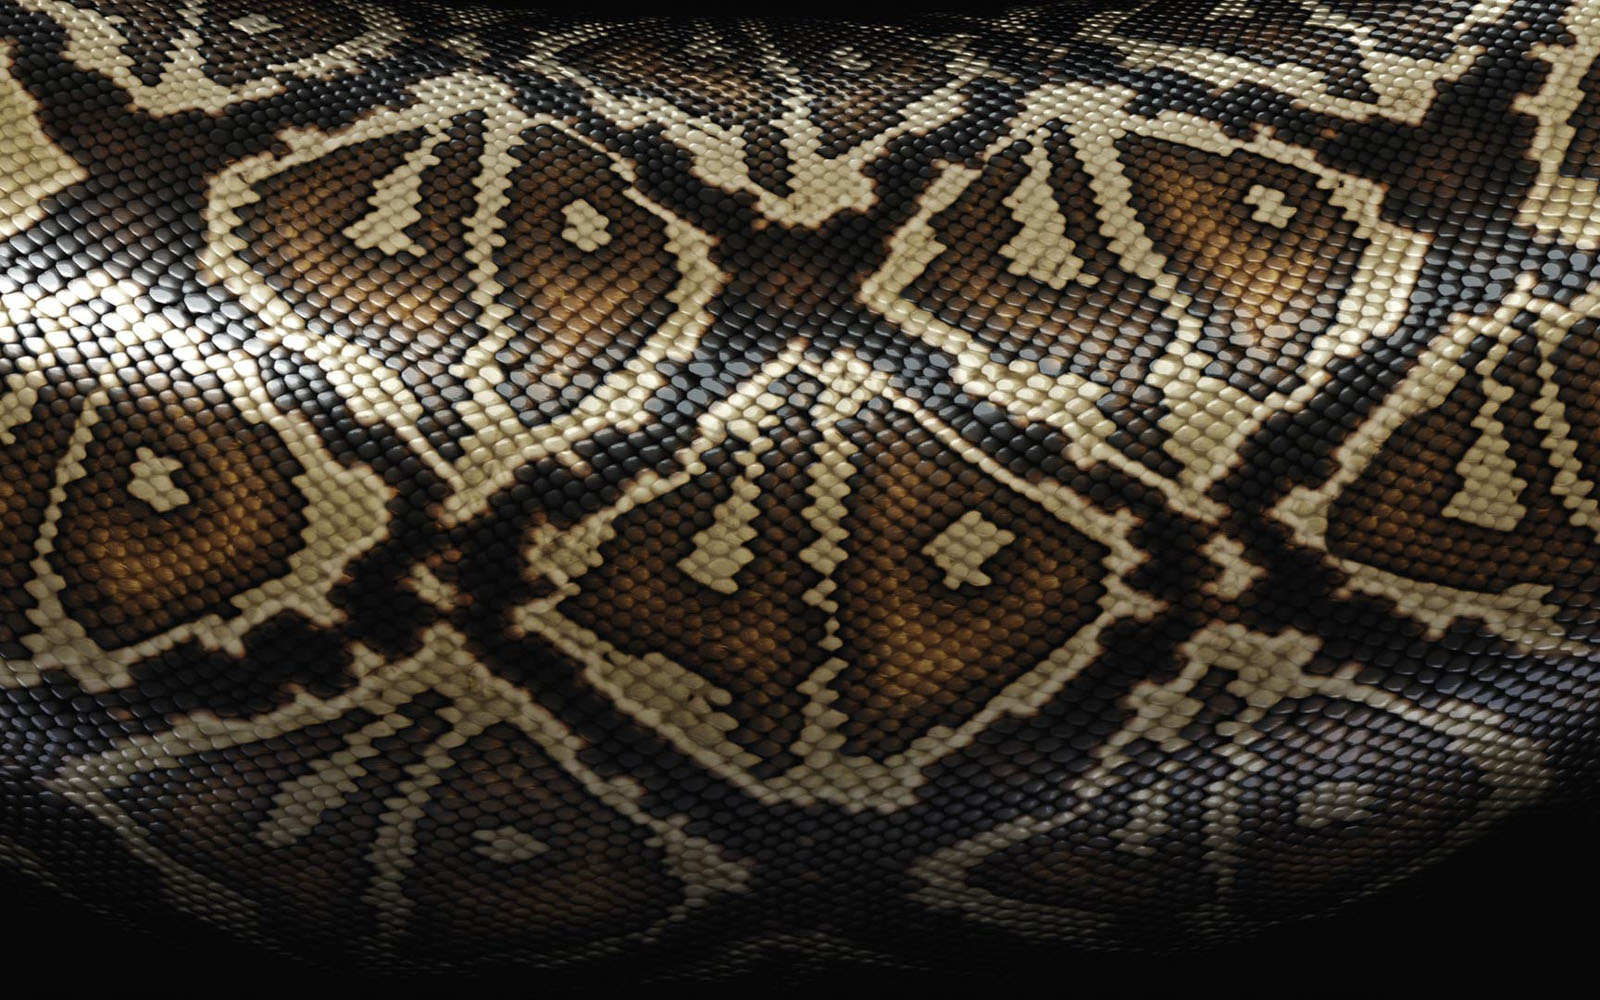 Tag Snake Skin Wallpaper Image Photos And Pictures For